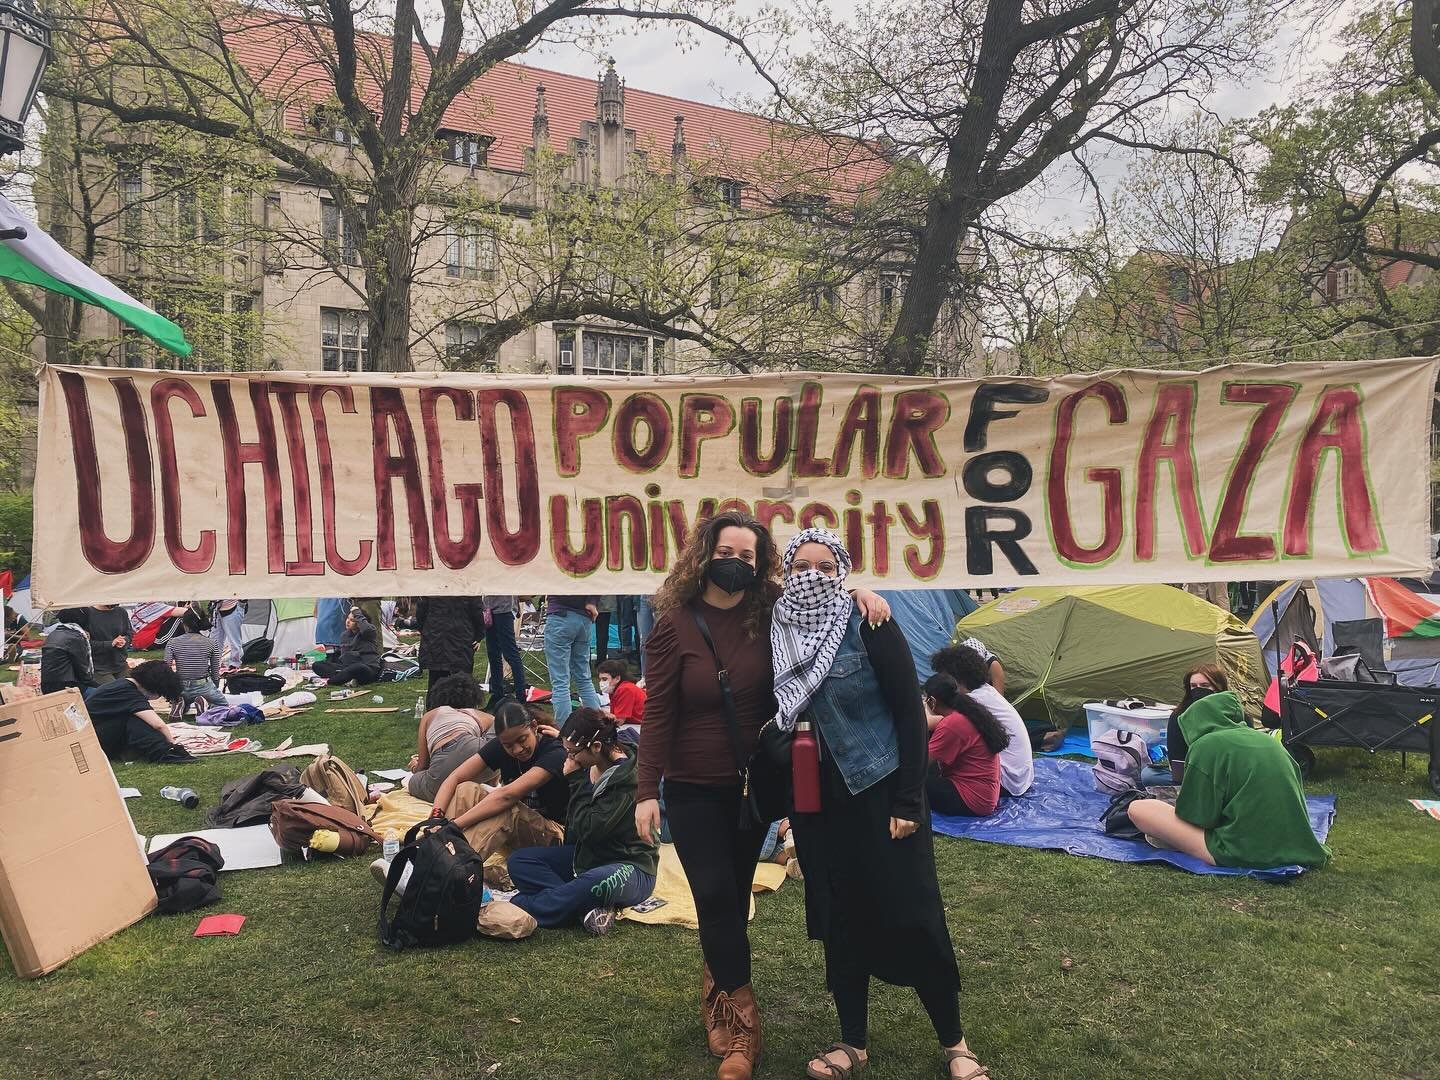 🚨📢 At MJF we firmly support the student movements across the country calling for divestment from genocide of Palestinians. Today, our MJF chapter showed up to support the Chicago Popular University for Gaza. U of Chicago is one of the top 10 leadin